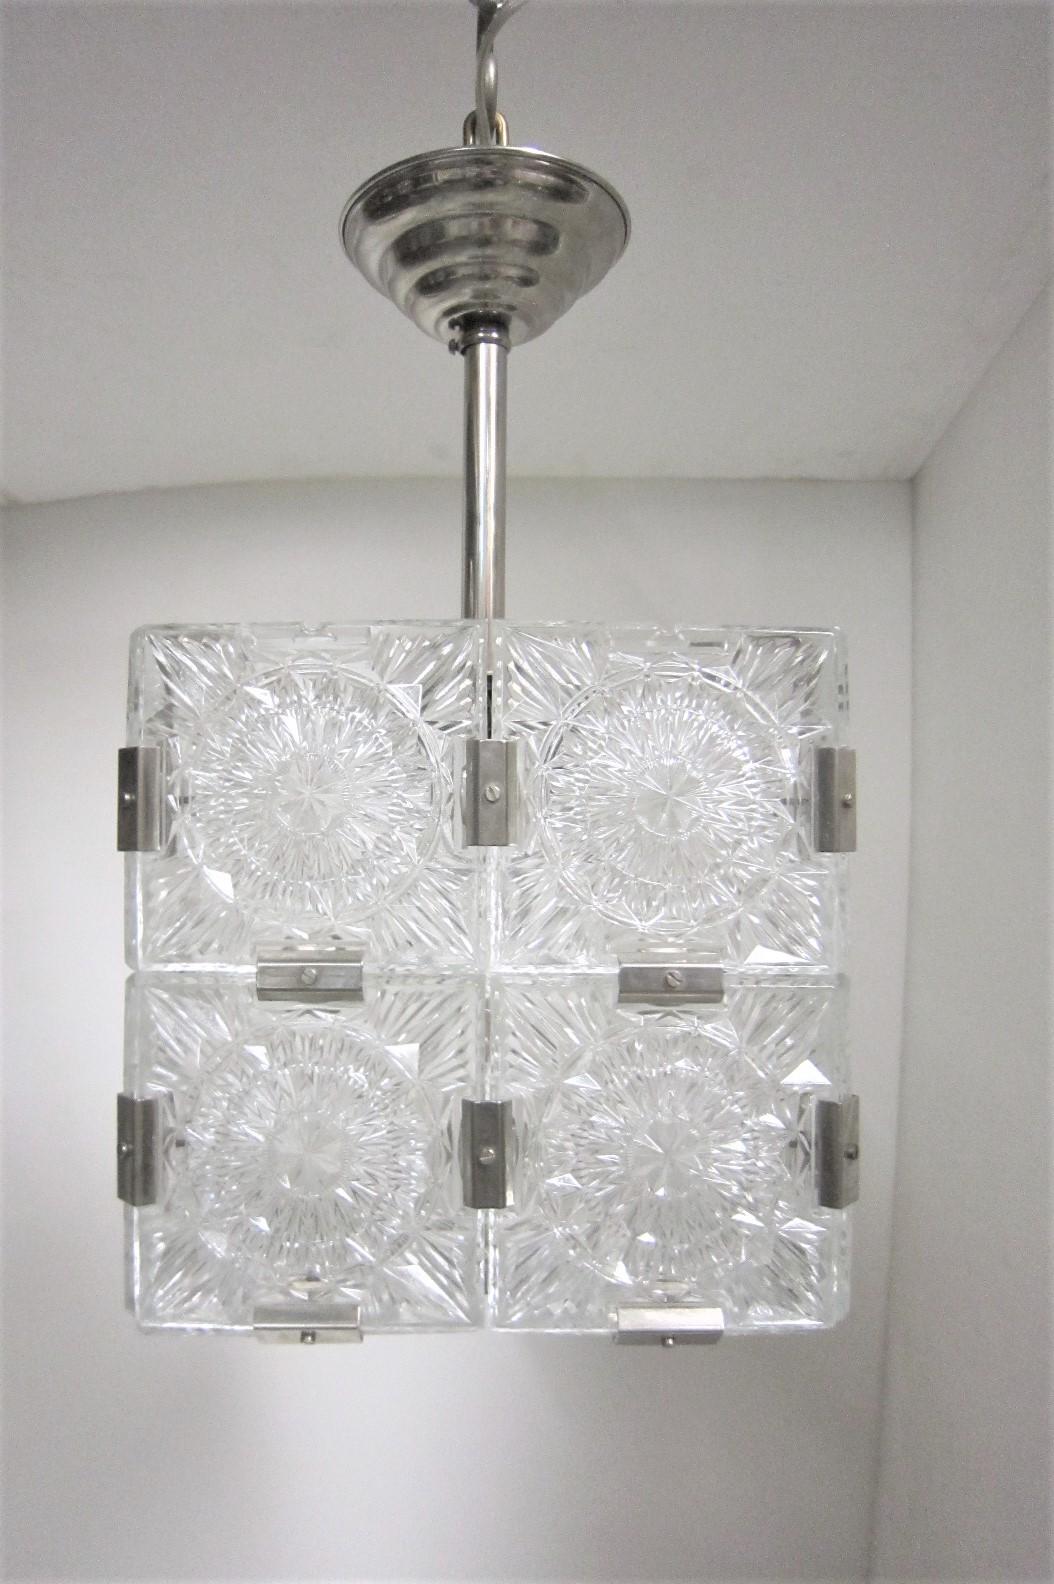 Set of Three Original Box Cube Pendant Lights, Cut Glass with Nickeled Clips For Sale 9